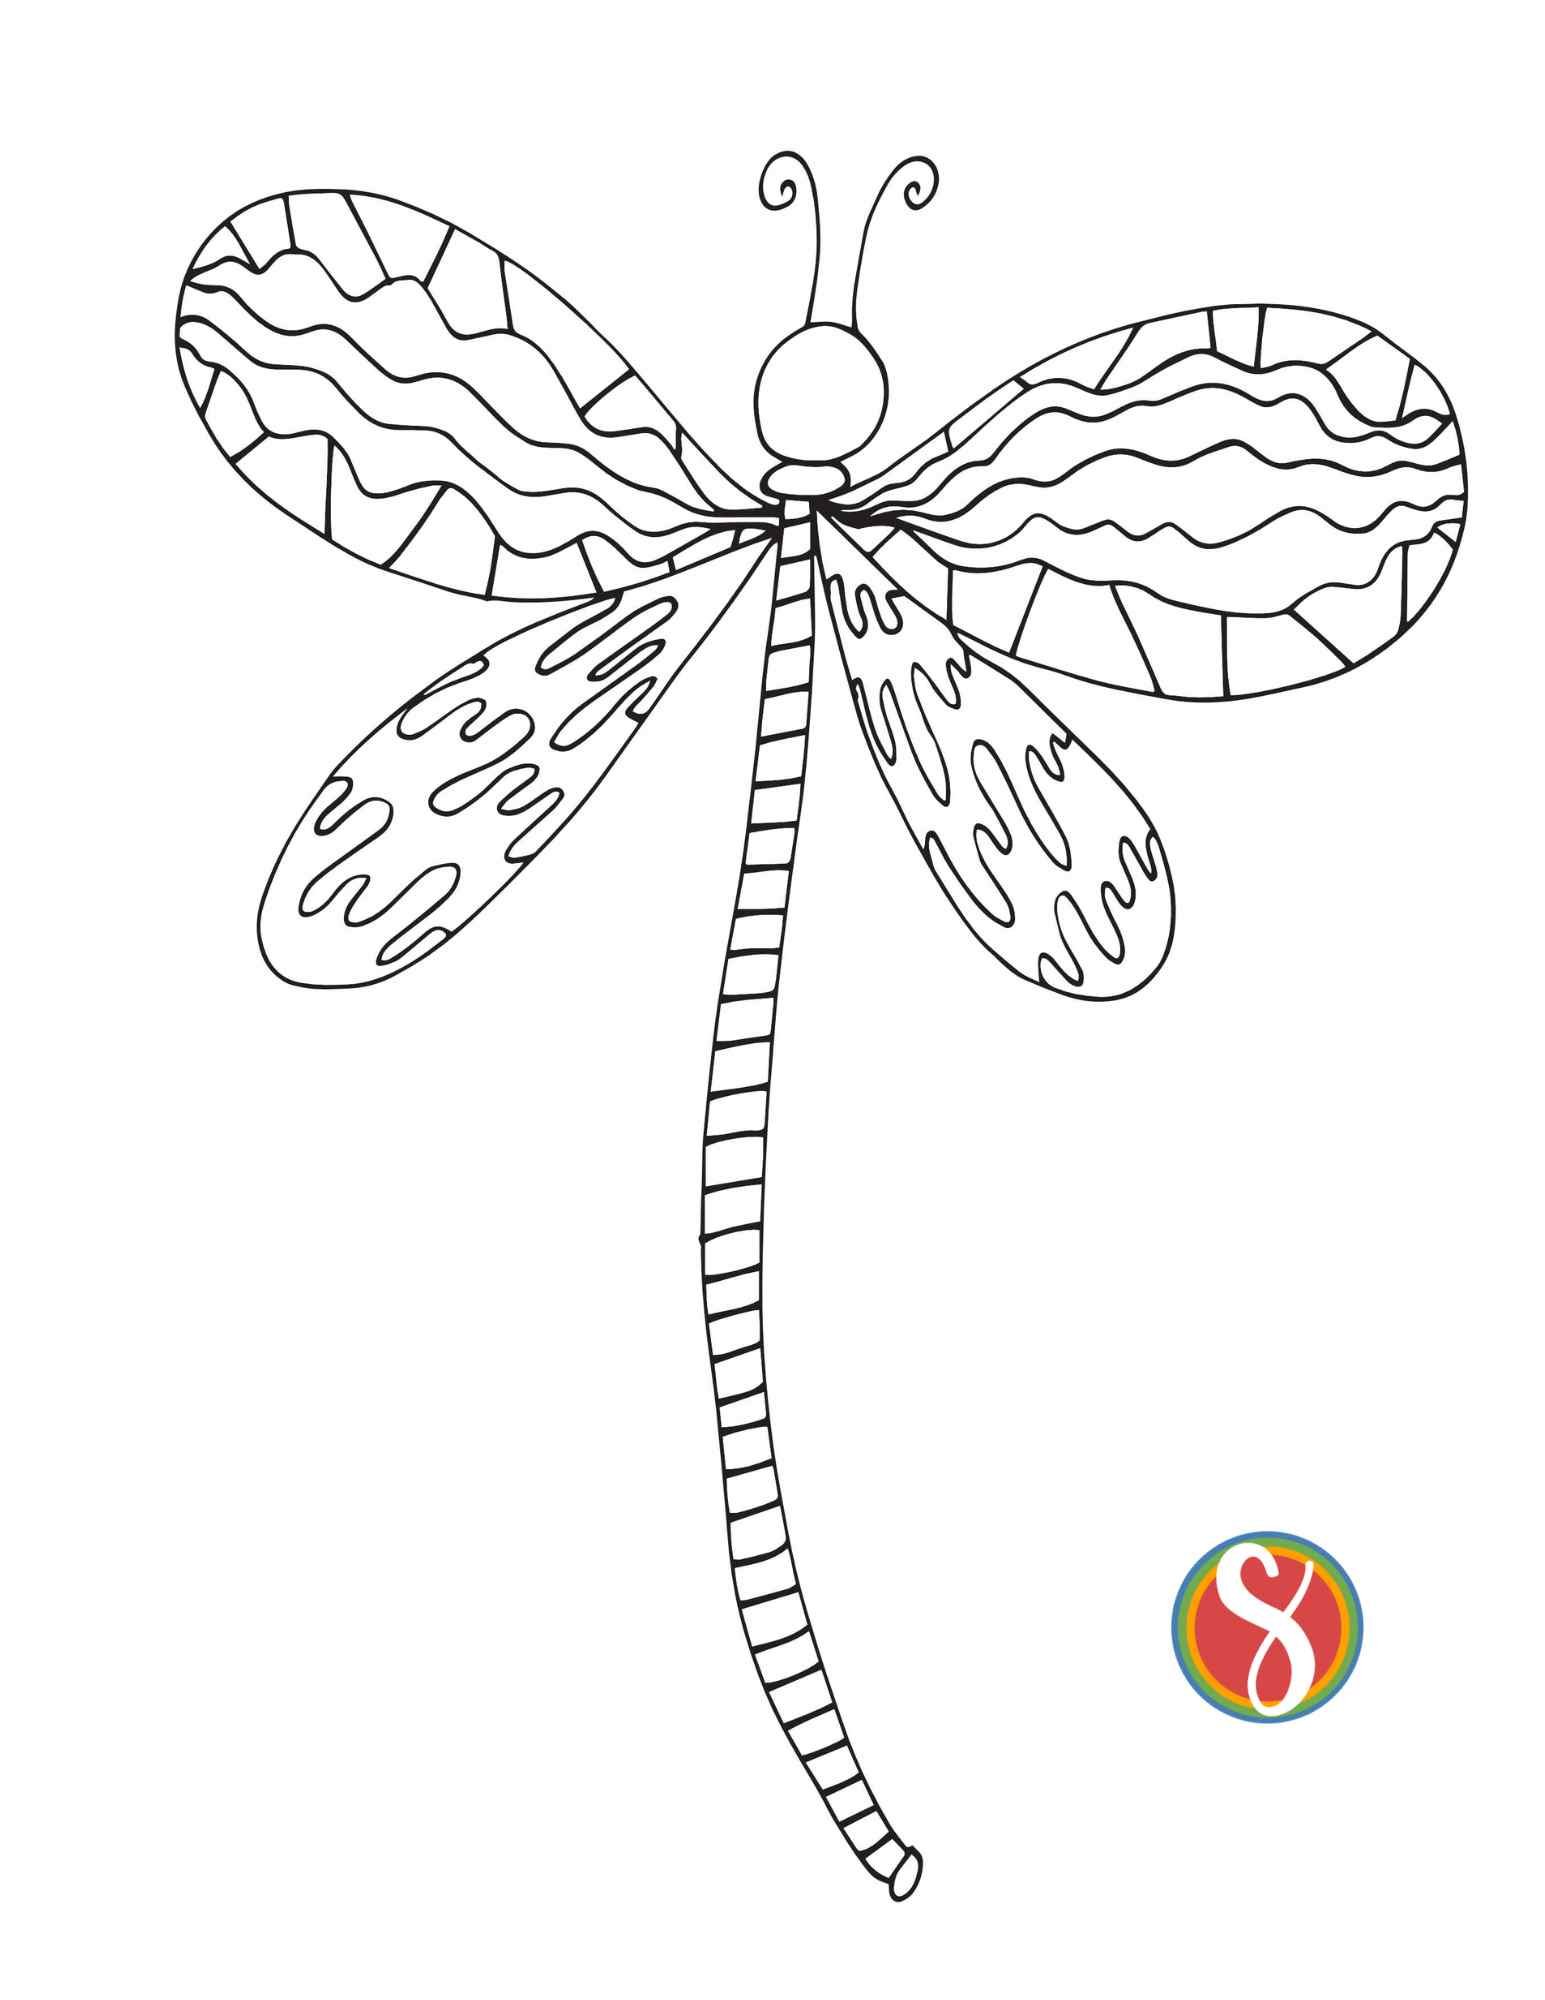 Free dragonfly coloring pages â stevie doodles